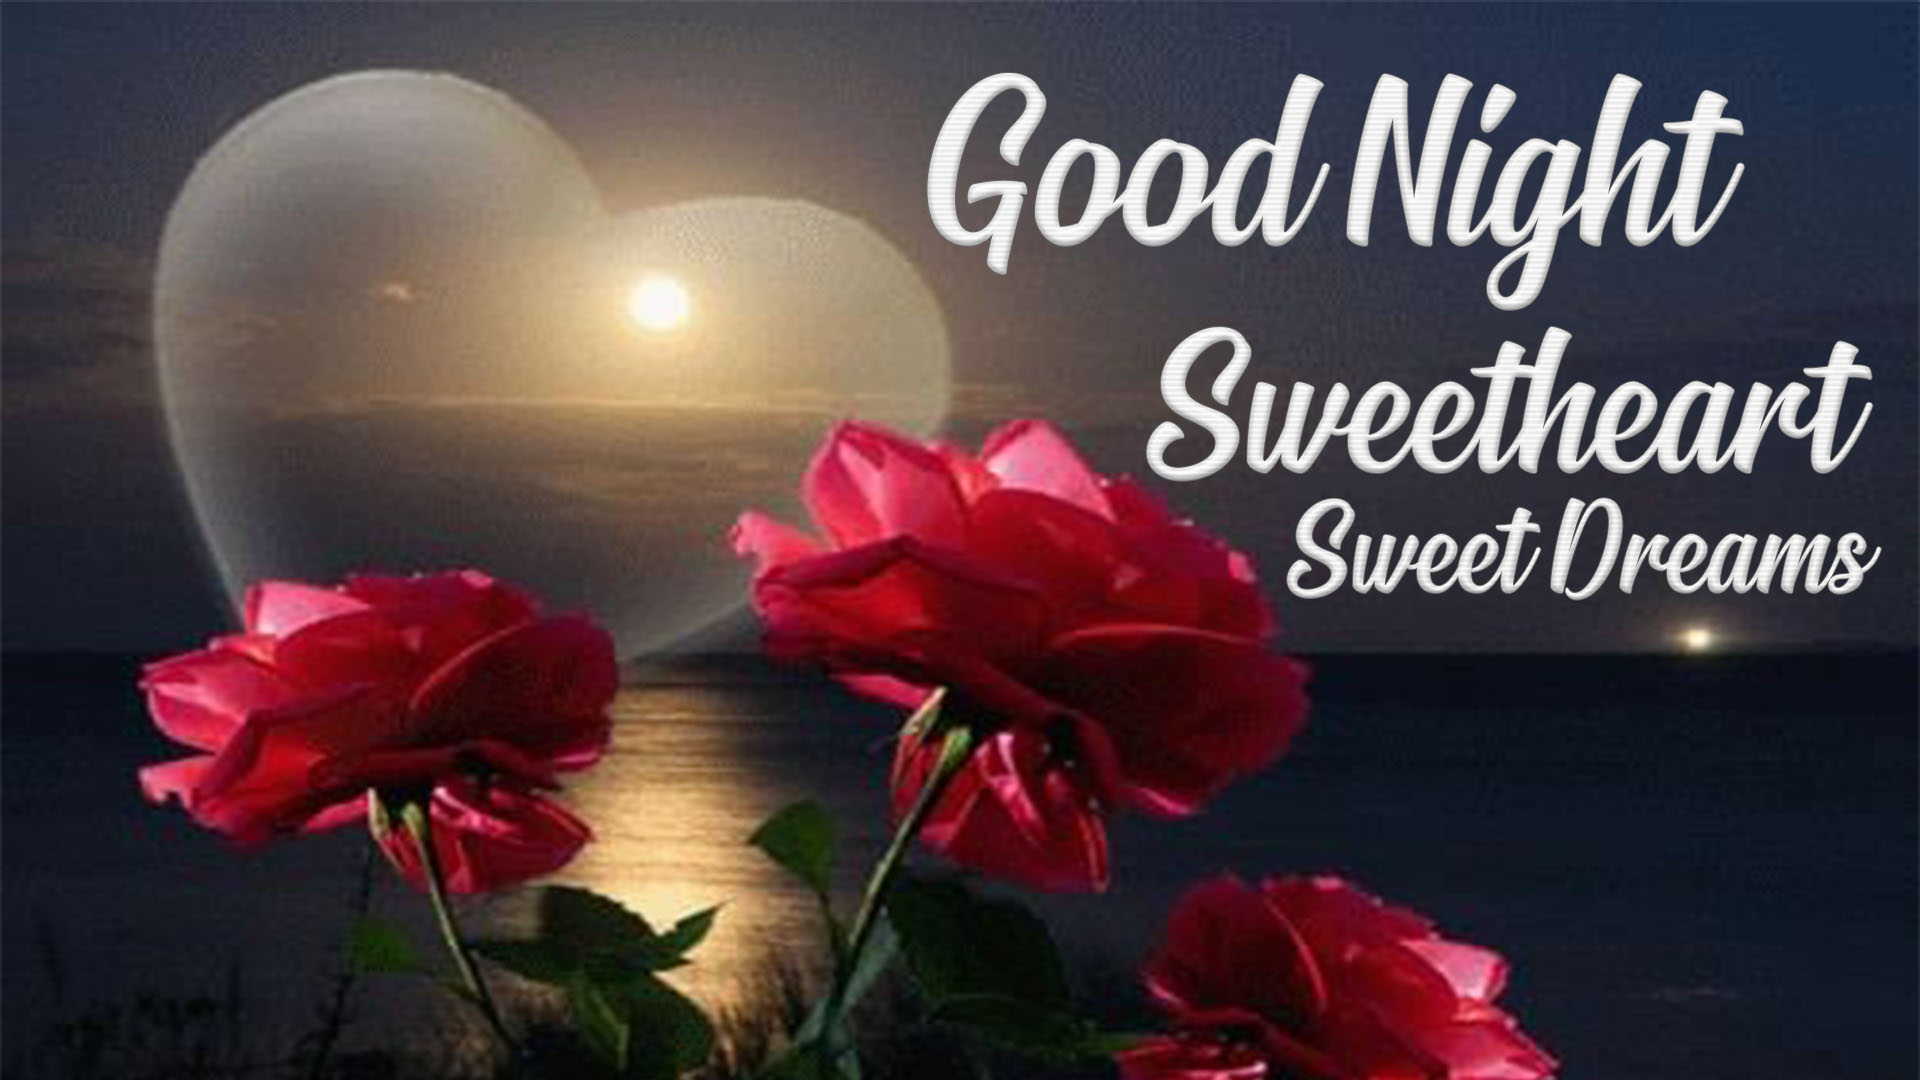 Romantic Good Night Wishes For Girl Friend & Images